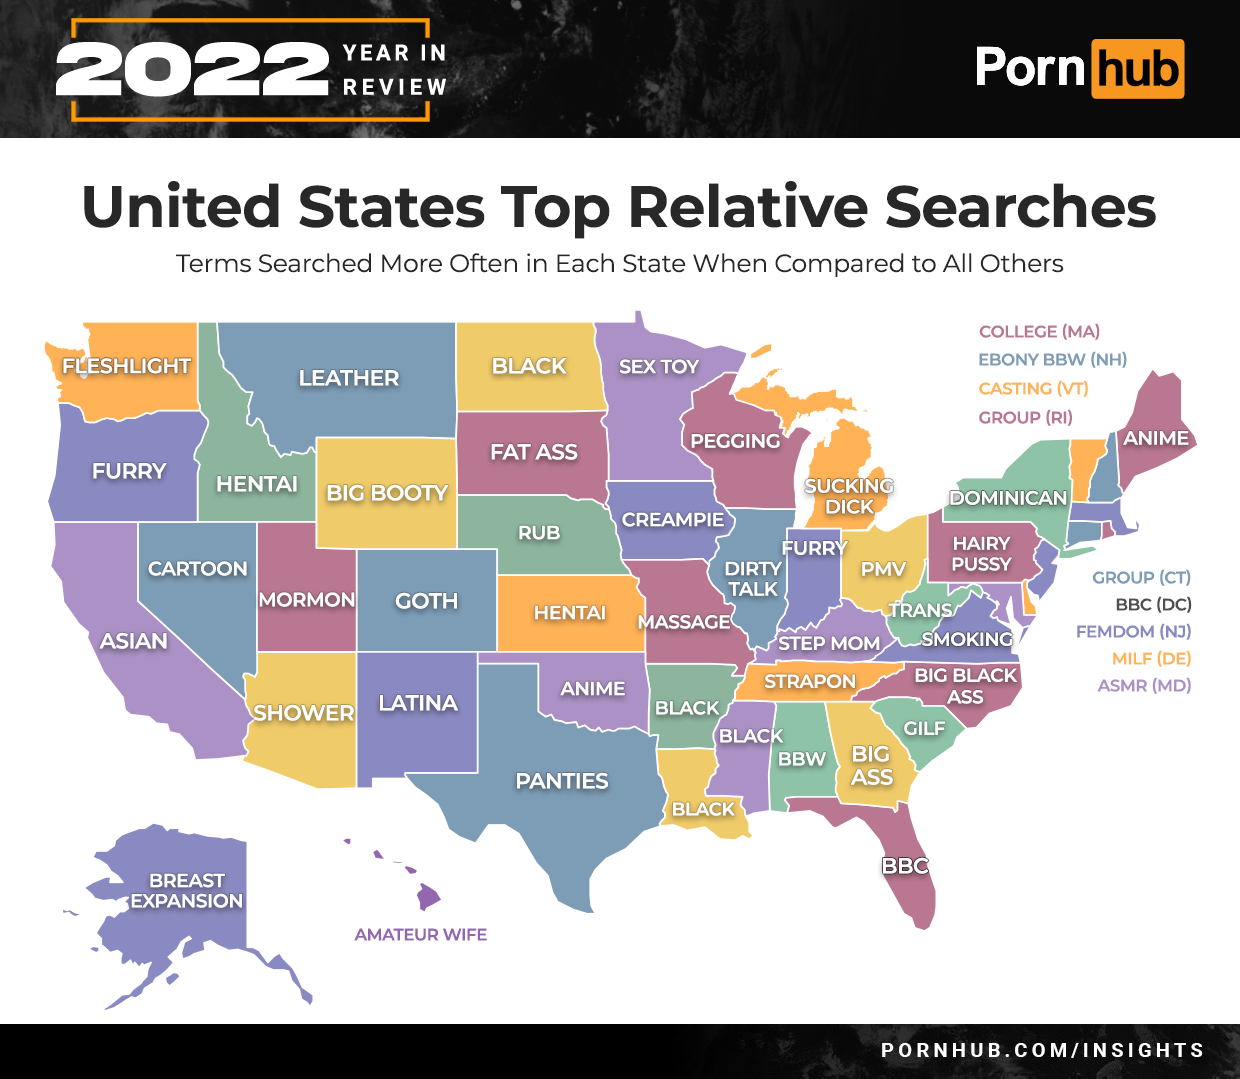 pornhub-insights-2022-year-in-review-united-states-relative-searches-by-state-map.png